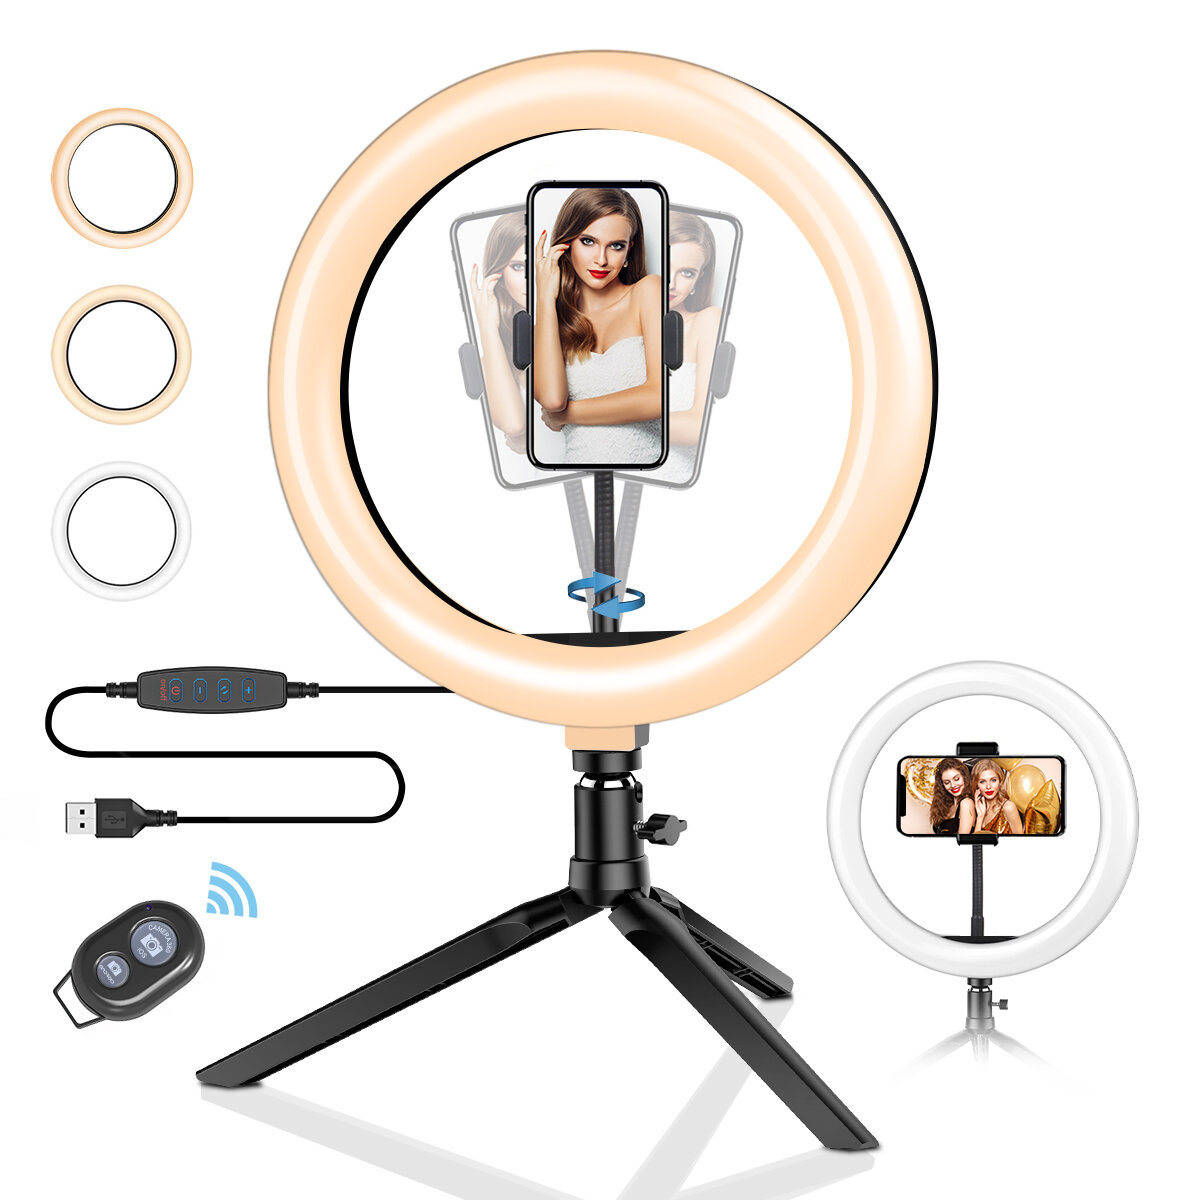 BlitzWolf® BW-SL3 10inch Dimmable LED Ring Light Tripod Stand USB Plug for TikTok Youtube Live Stream Makeup with Phone Clip